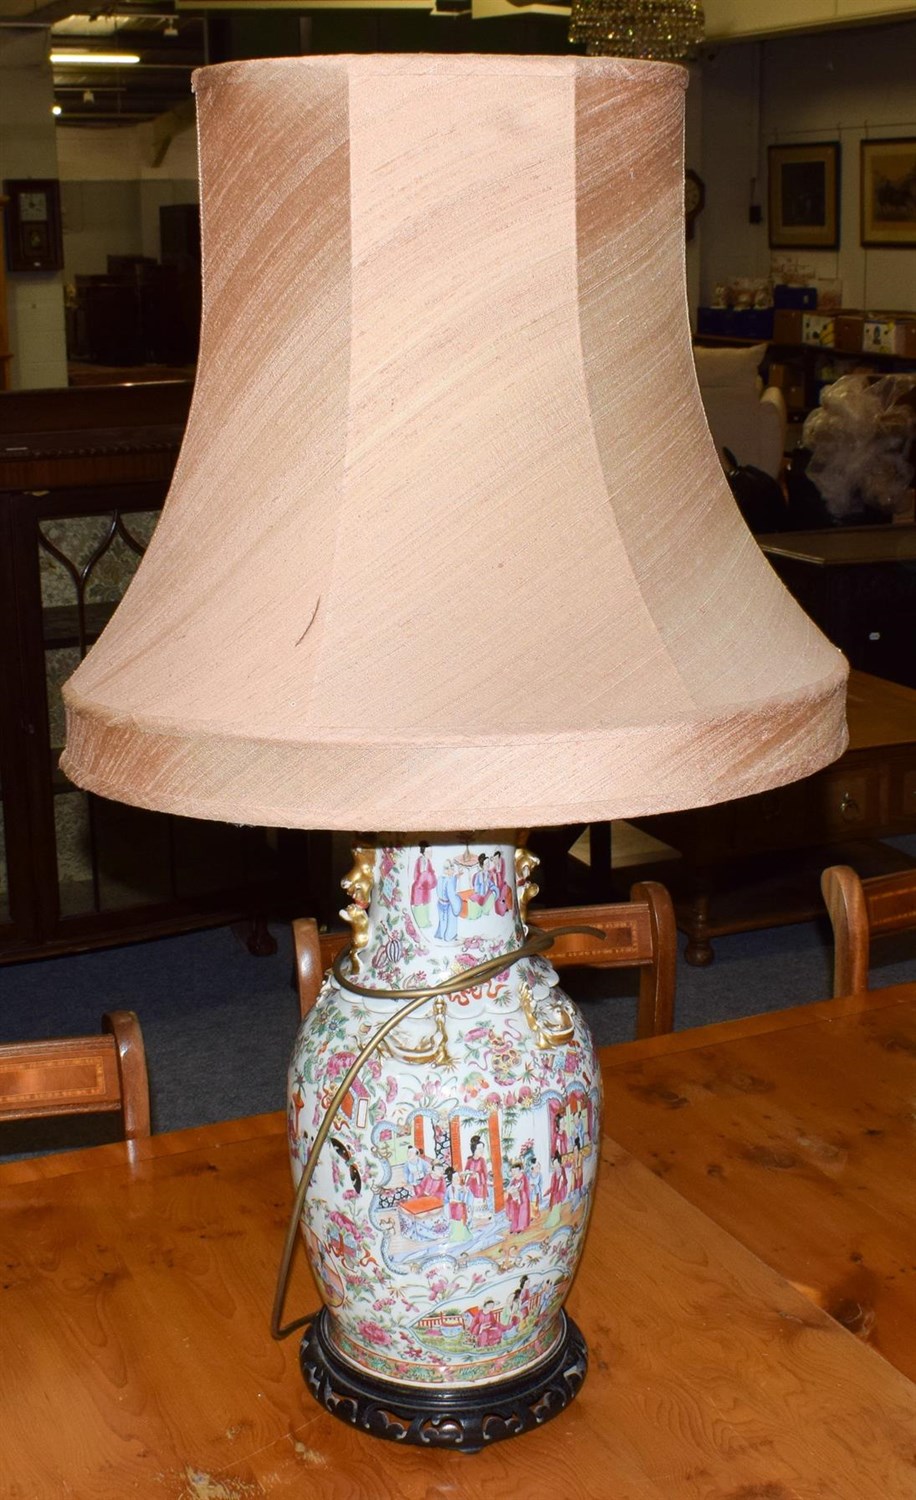 Lot 456 - A 19th century Chinese export vase now converted to a table lamp